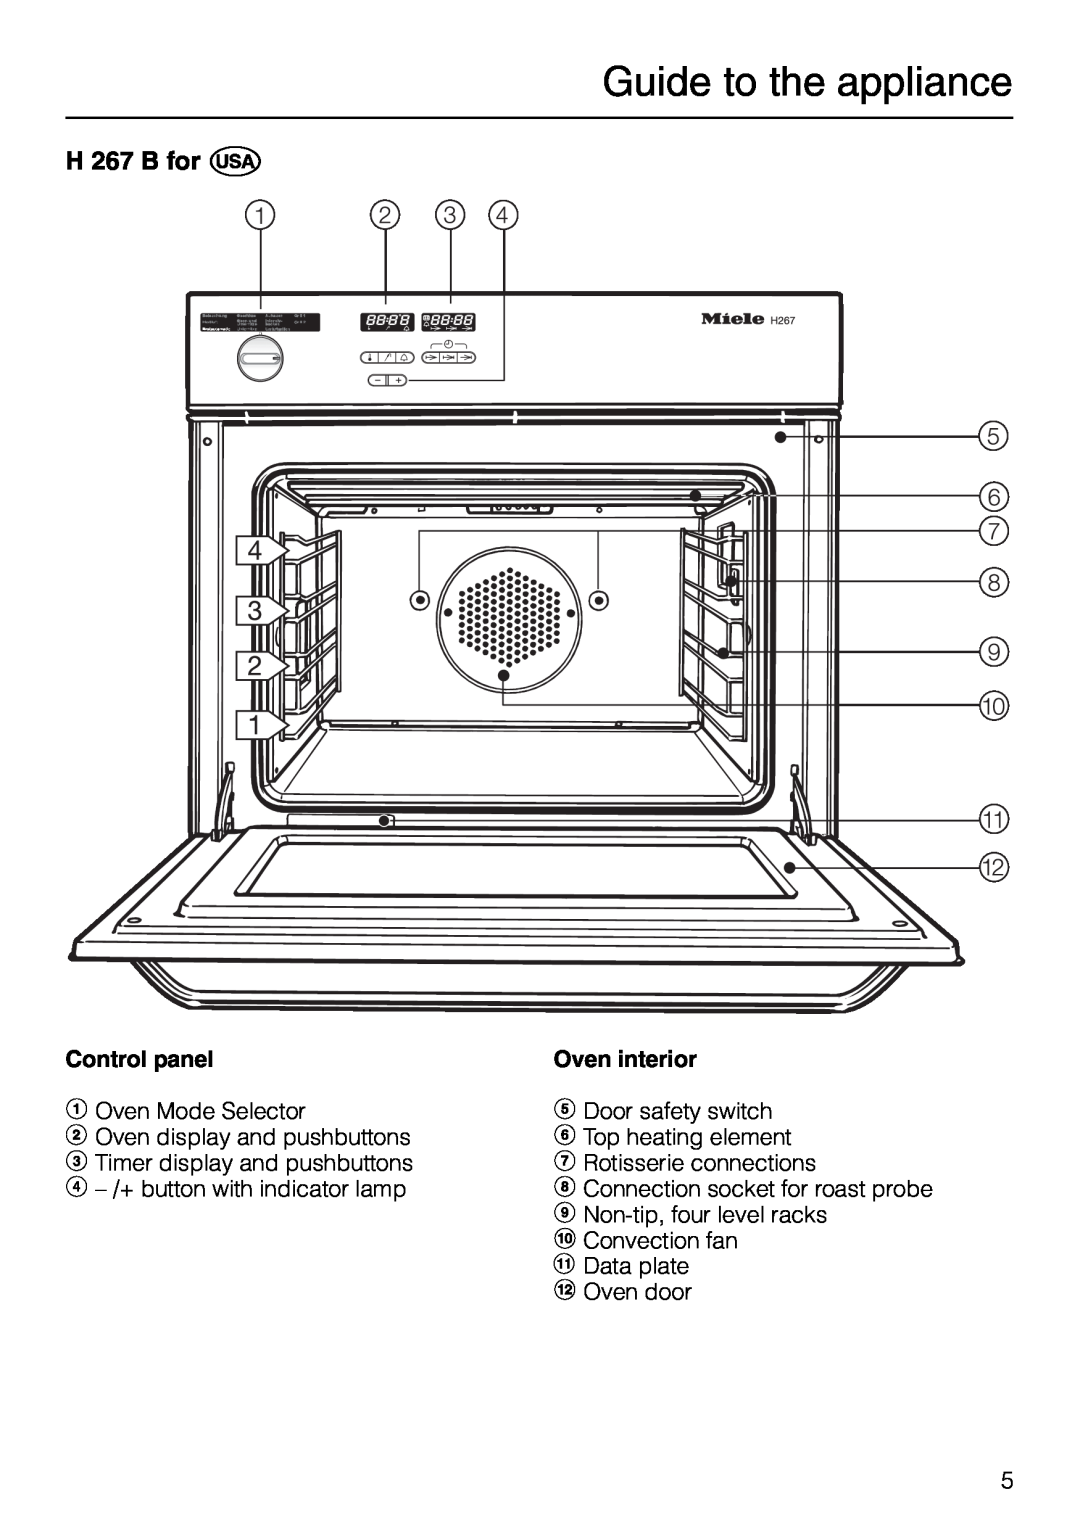 Miele H 277 B manual H 267 B for ö, Guide to the appliance, Control panel, bOven Mode Selector, Oven interior 